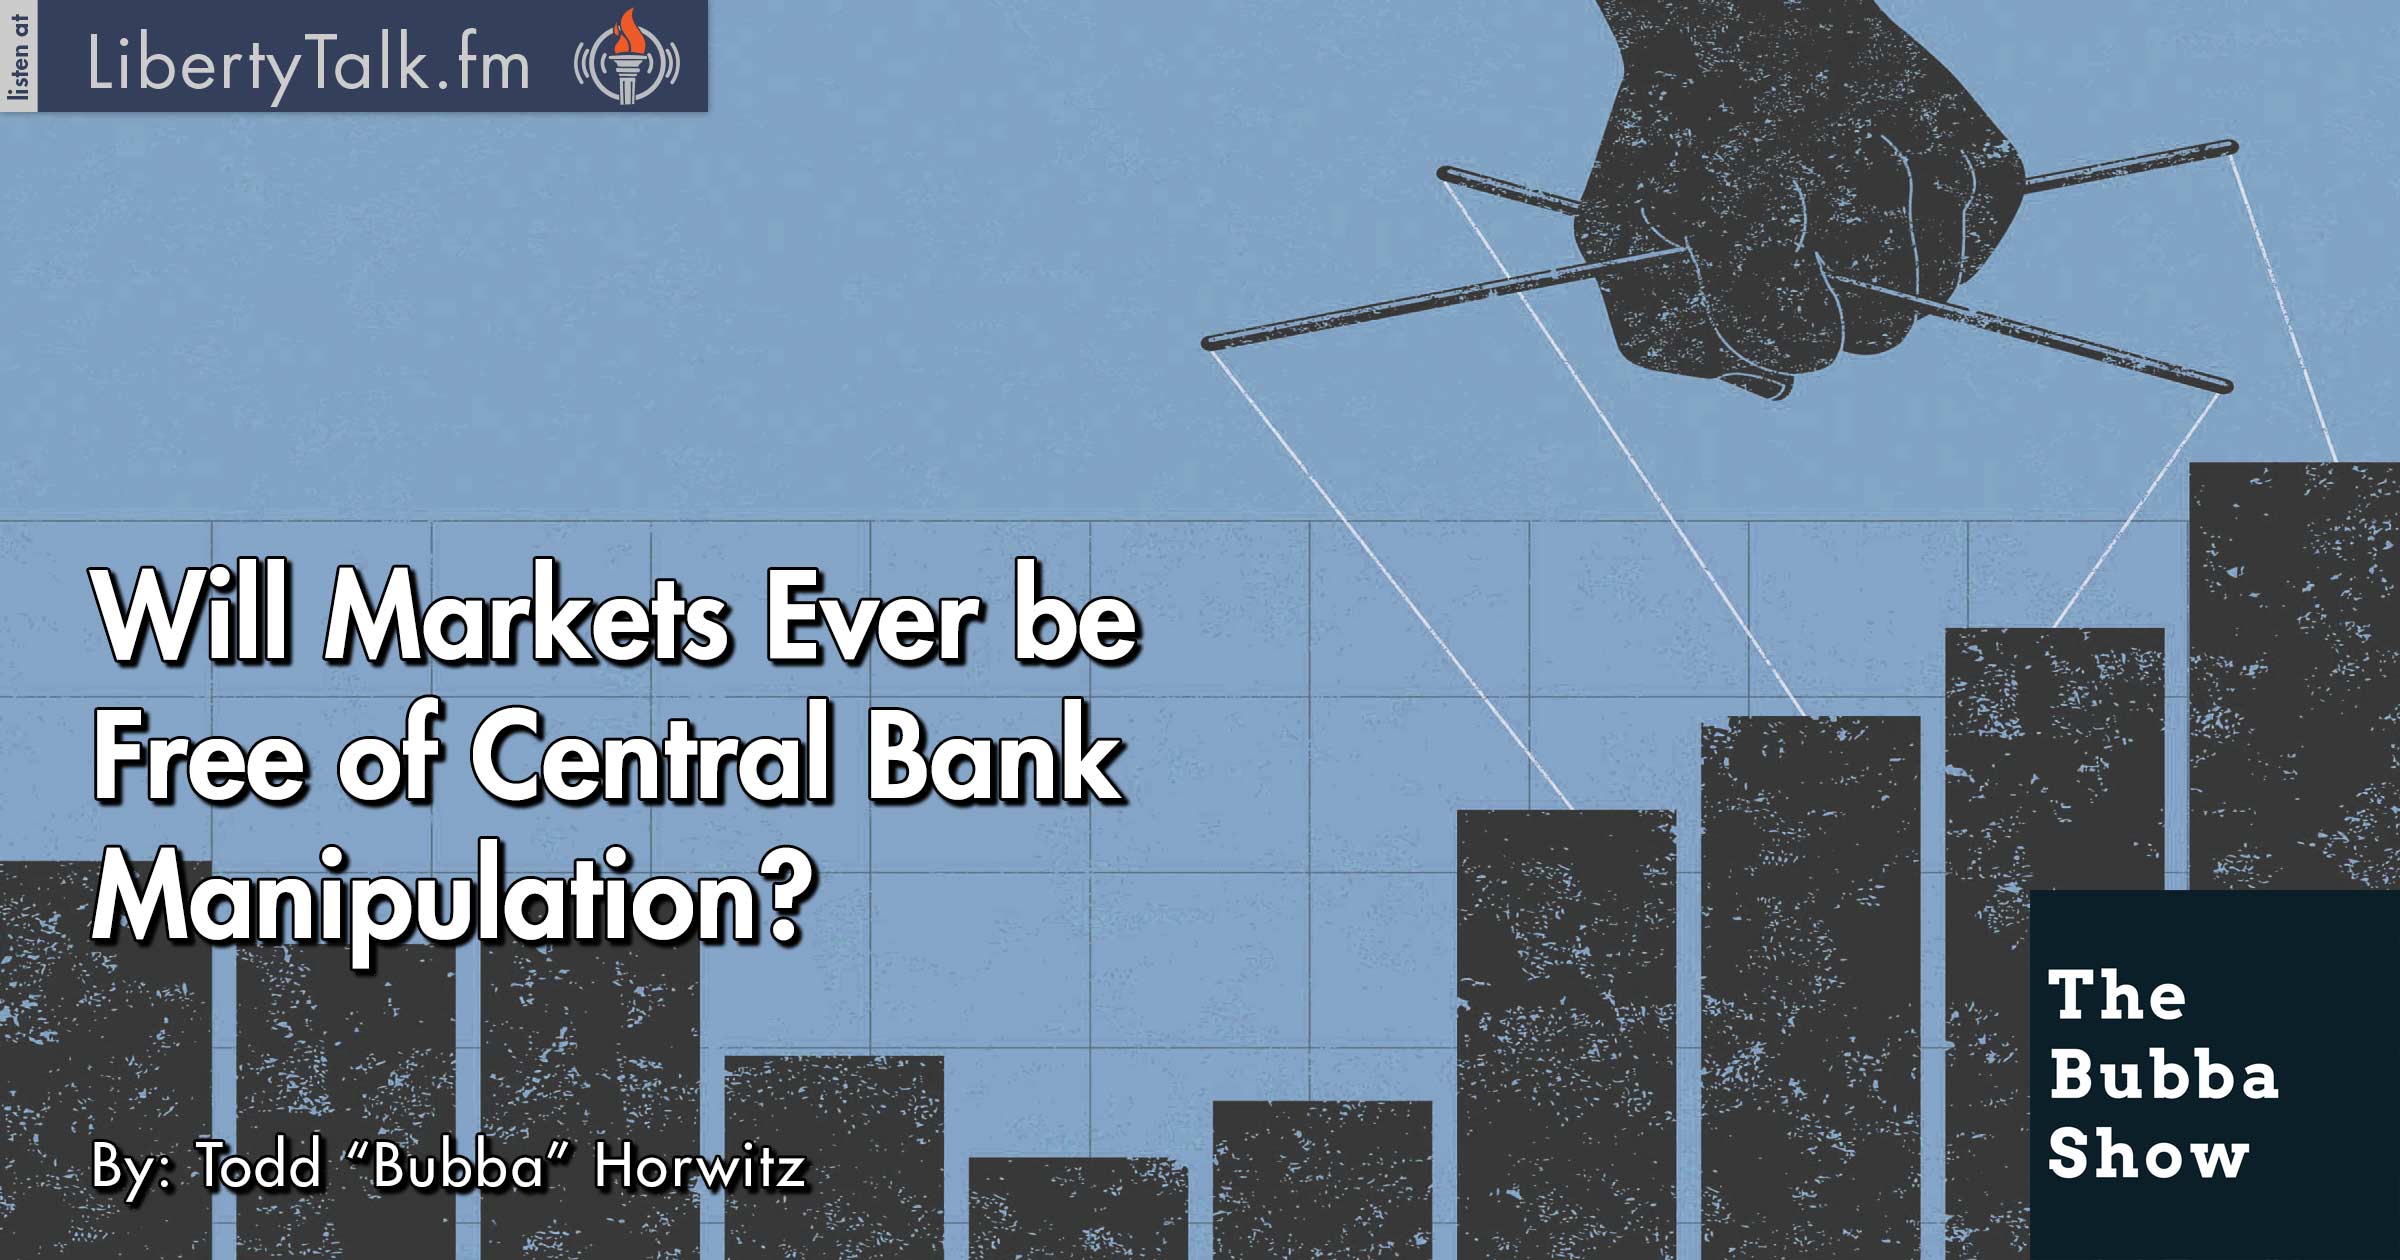 Will Markets Ever be Free of Central Bank Manipulation? The Bubba Show